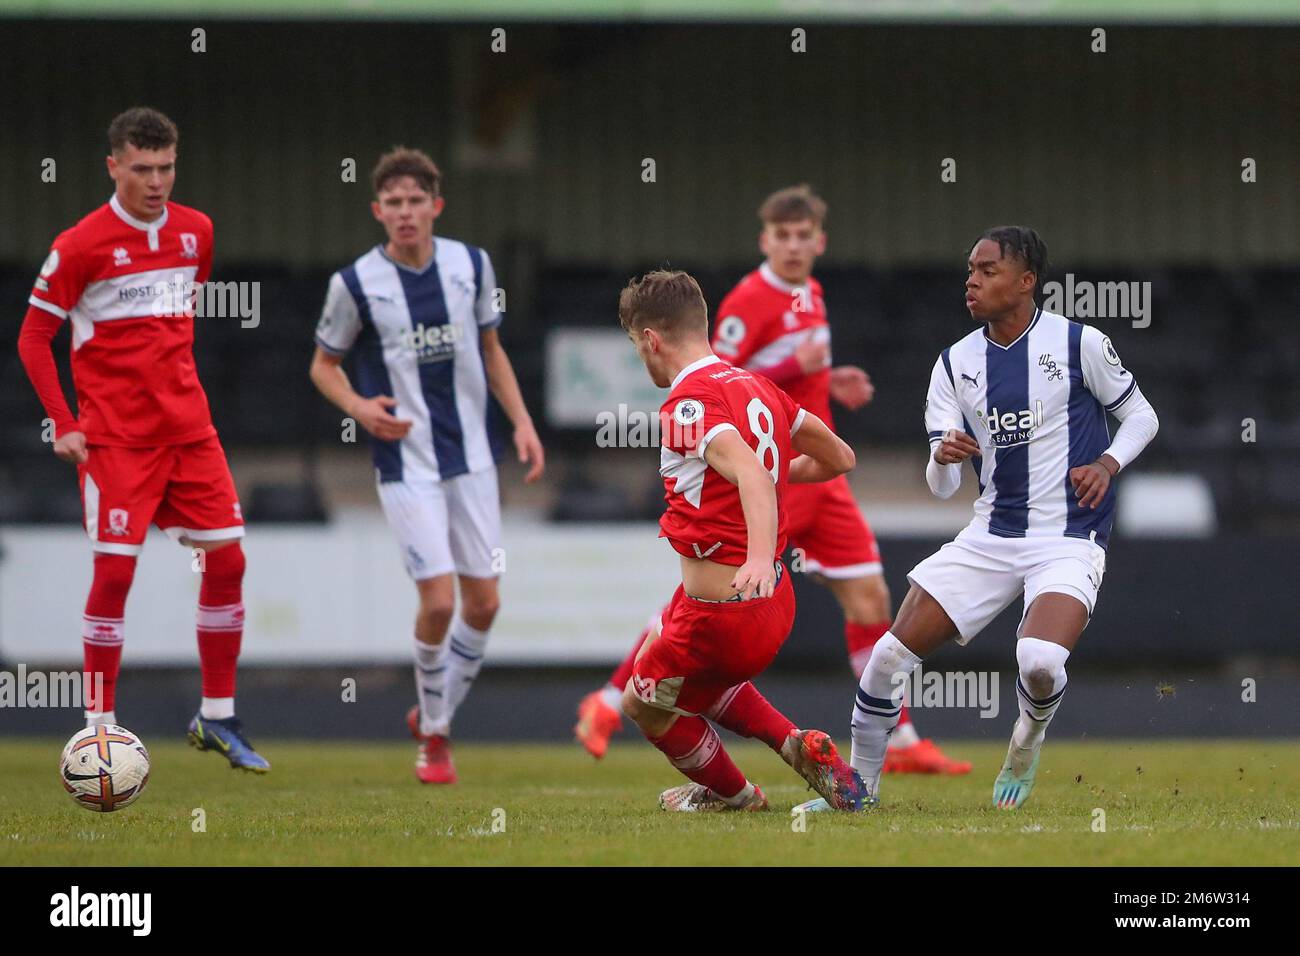 Hednesford, UK. 05th Jan, 2023. Akeel Higgins of West Bromwich Albion passes the ball during the Premier League Cup match West Bromwich Albion vs Middlesbrough U23's at Keys Park, Hednesford, United Kingdom, 5th January 2023 (Photo by Gareth Evans/News Images) Credit: News Images LTD/Alamy Live News Stock Photo